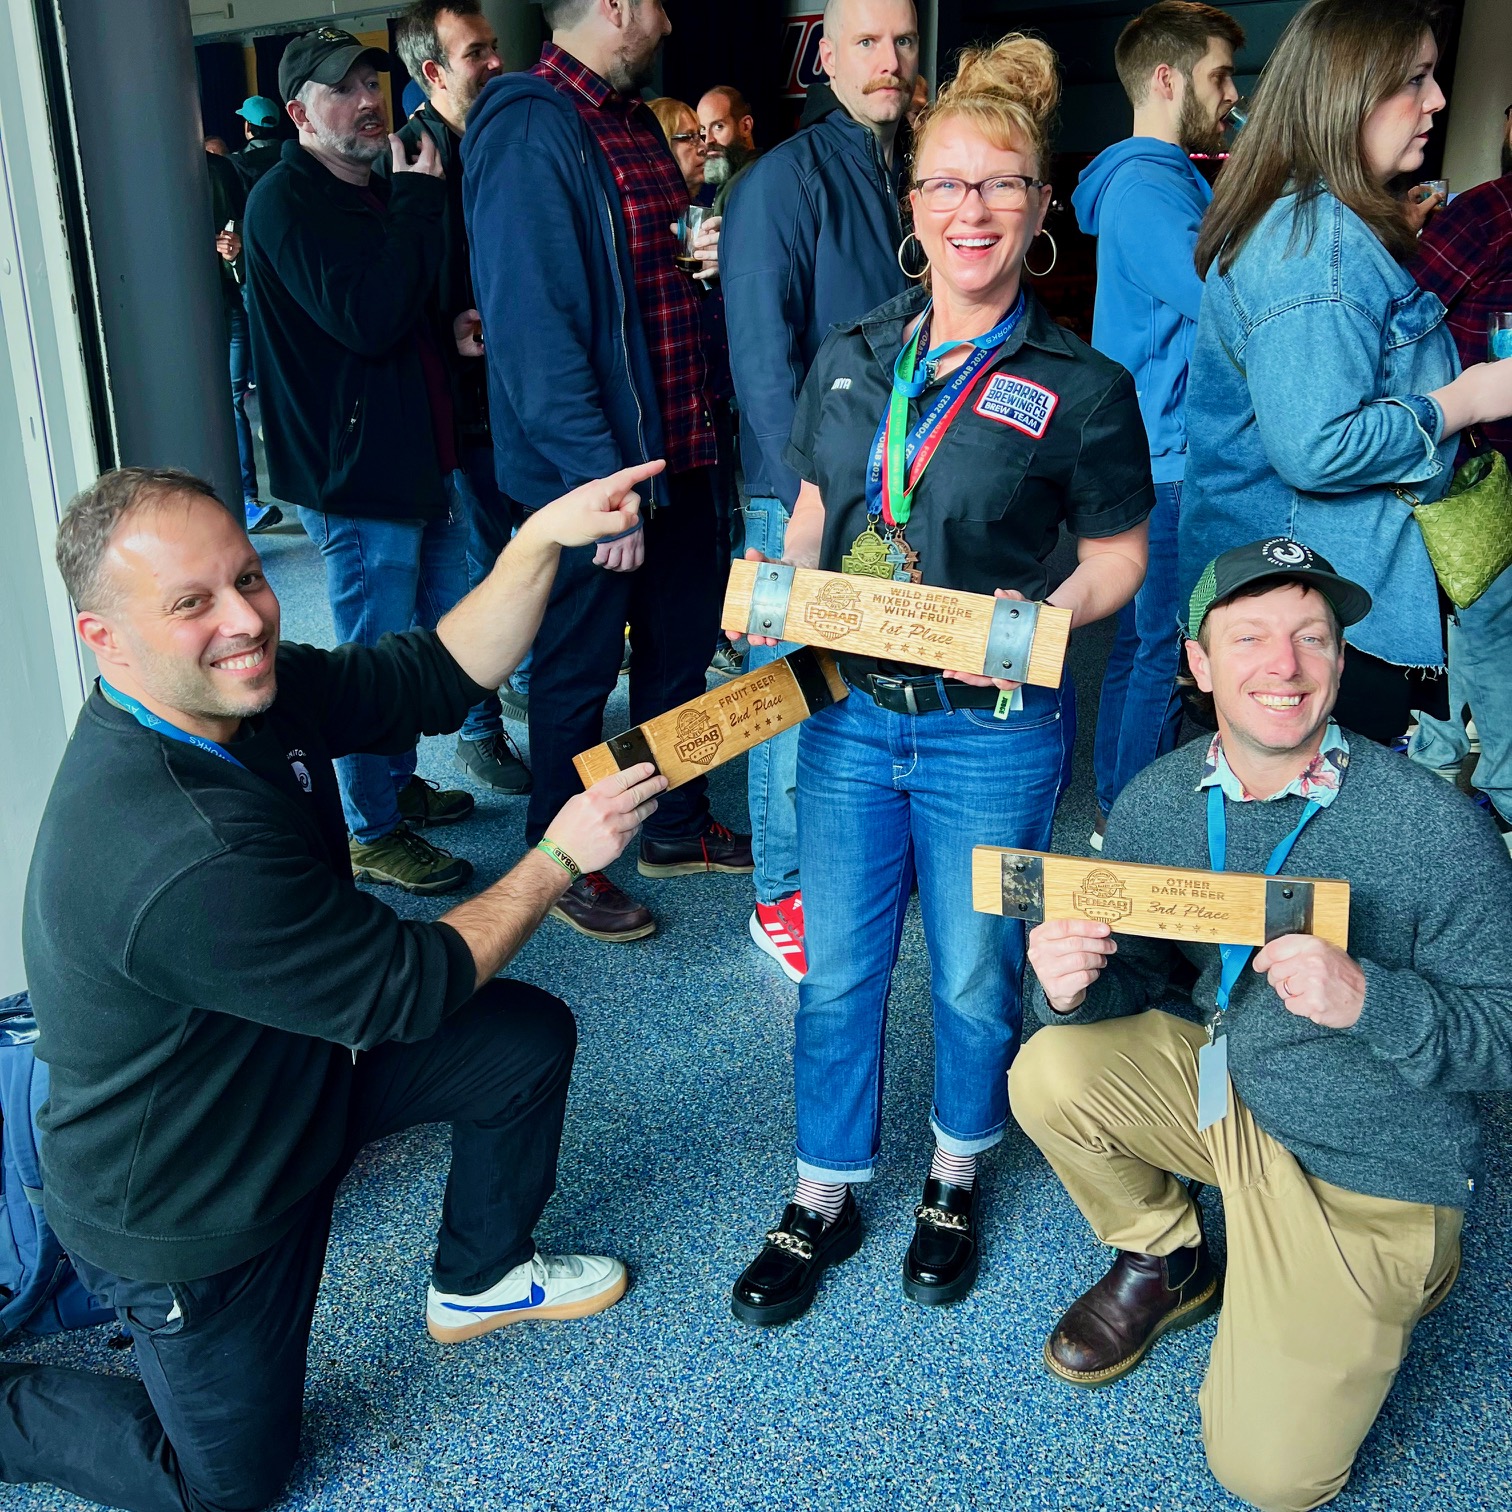 Ben Edmunds and Daniel Hynes of Breakside Brewery having fun while bowing down to Tonya Cornett on her trio of medals at the 2023 Festival of Wood and Barrel Aged Beer.